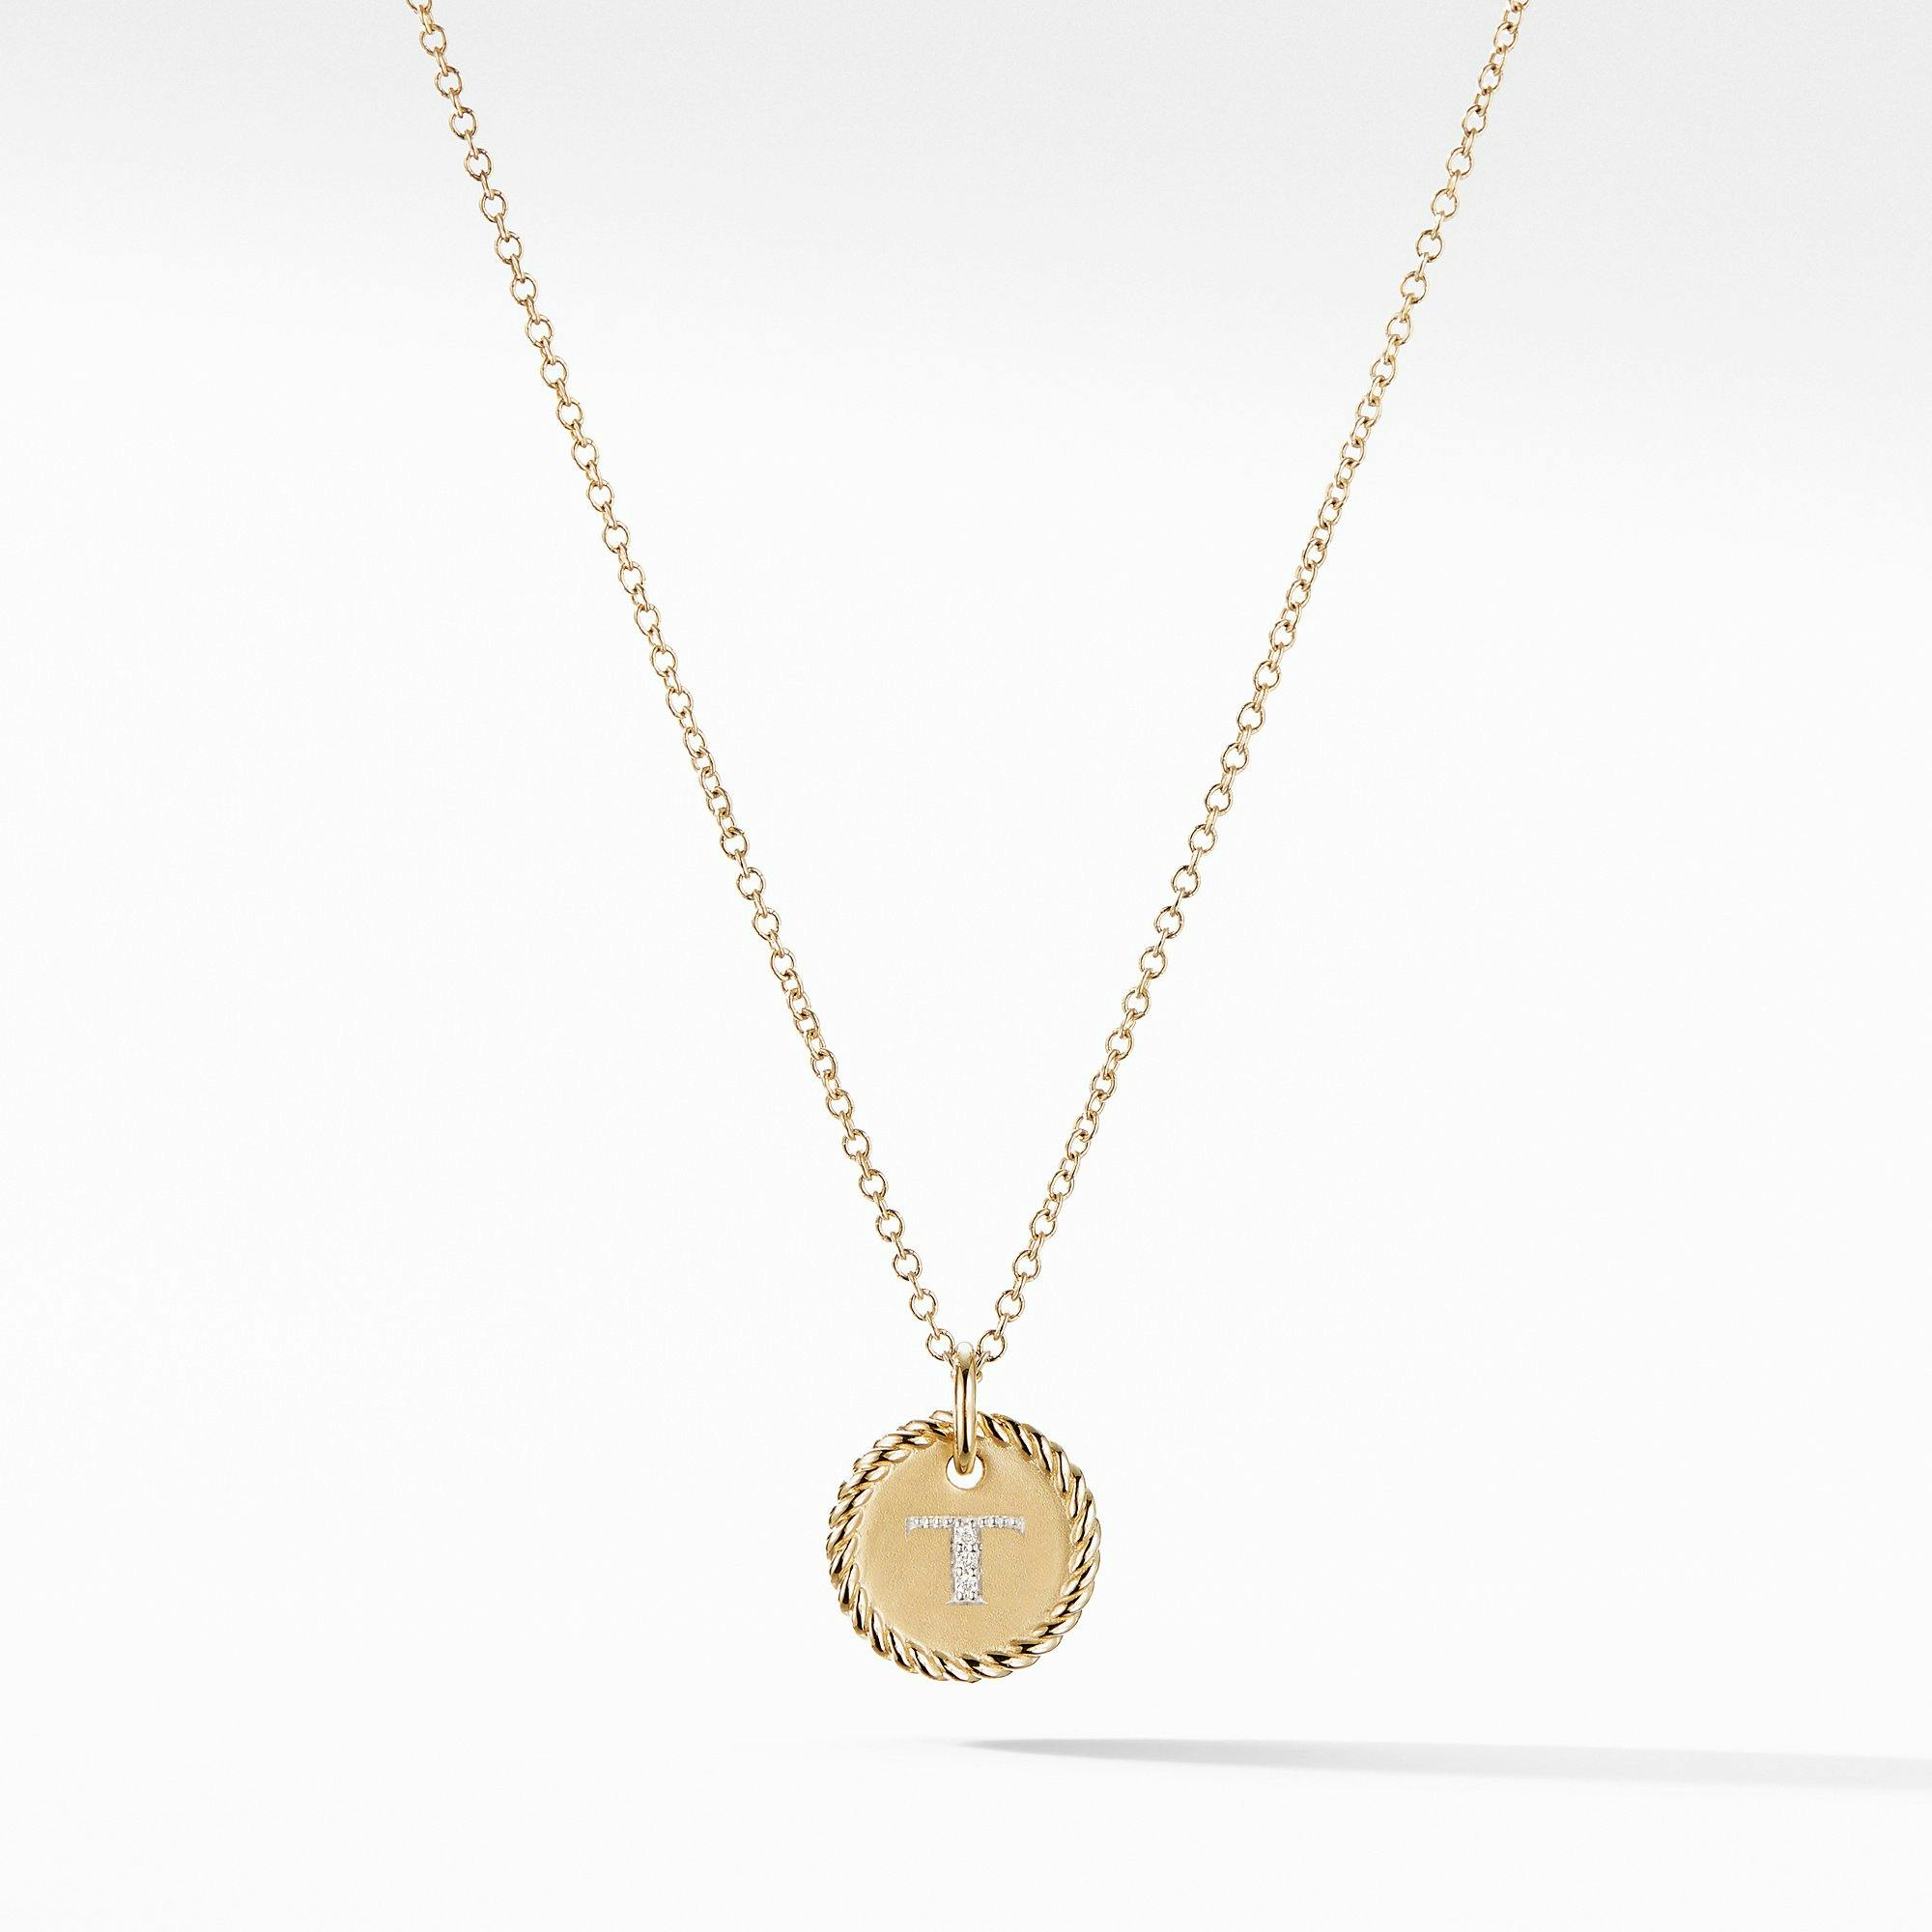 David Yurman "T" Initial Charm Necklace in 18k Yellow Gold with Diamonds